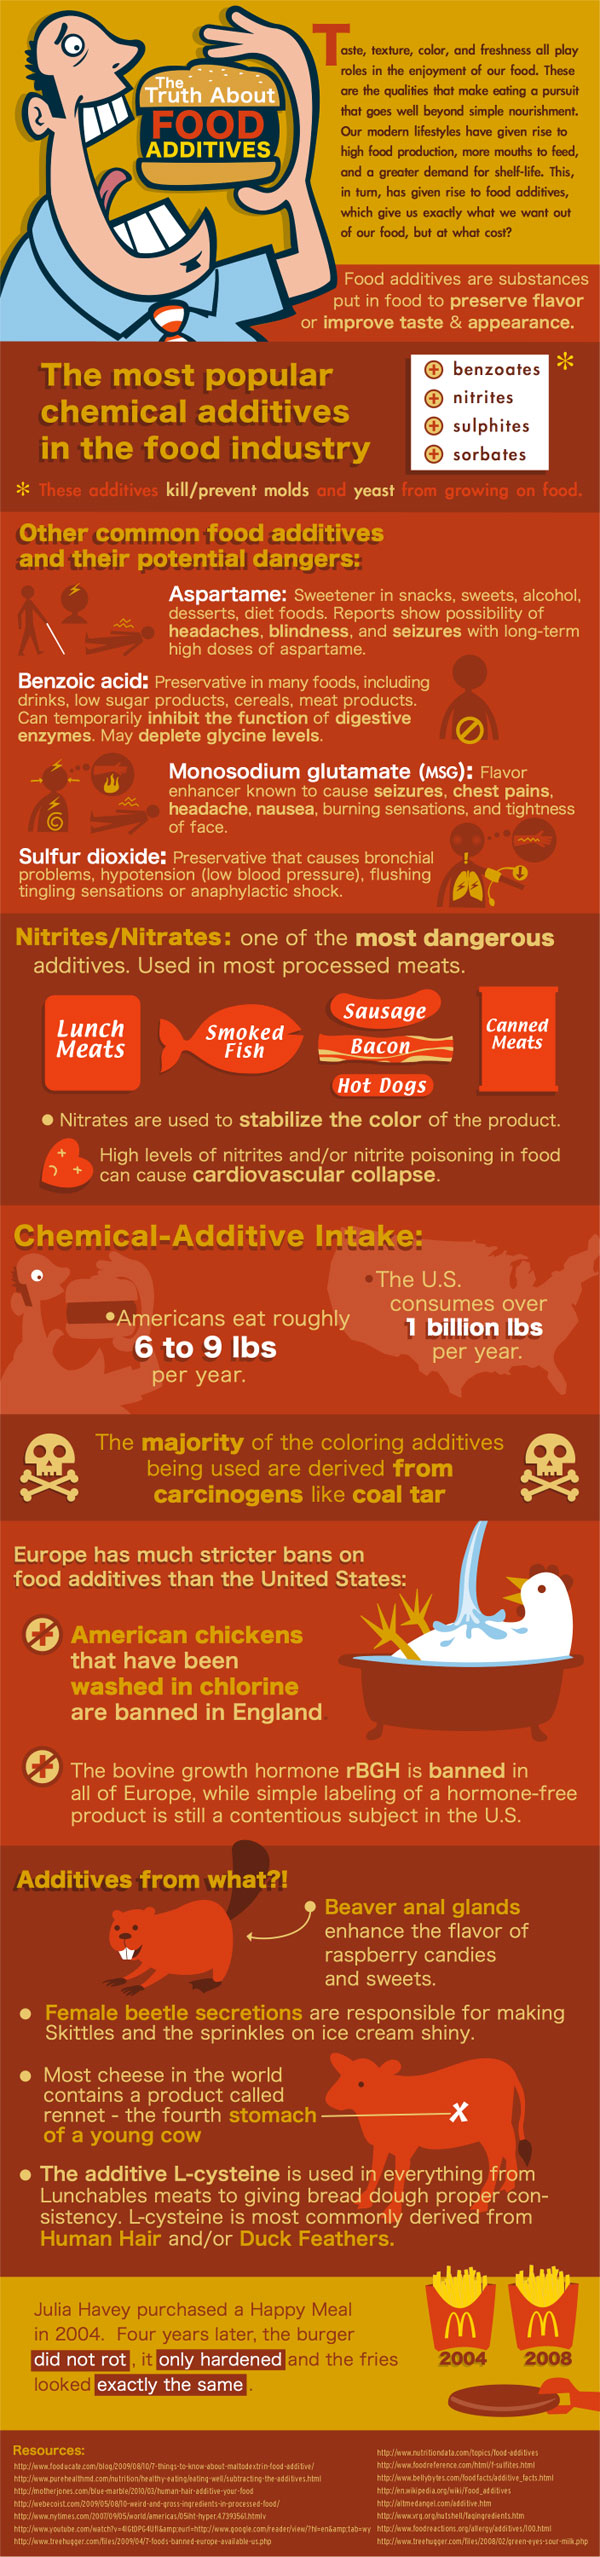 The Truth About Food Additives